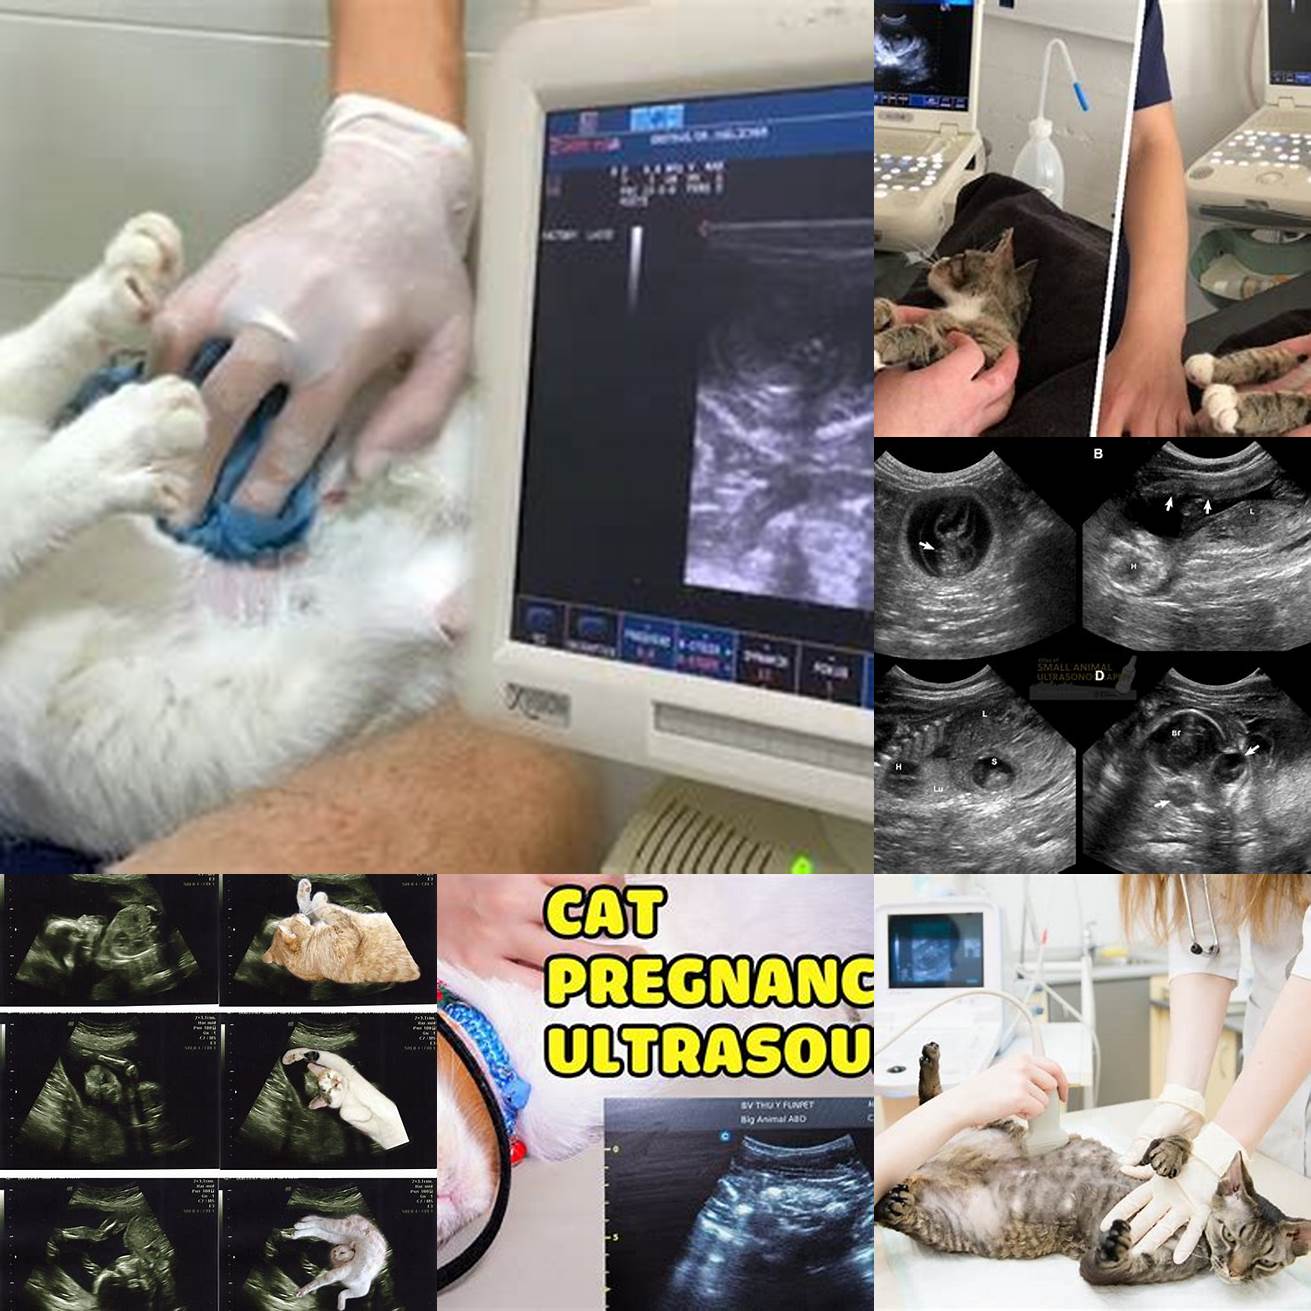 Ultrasound of pregnant cat